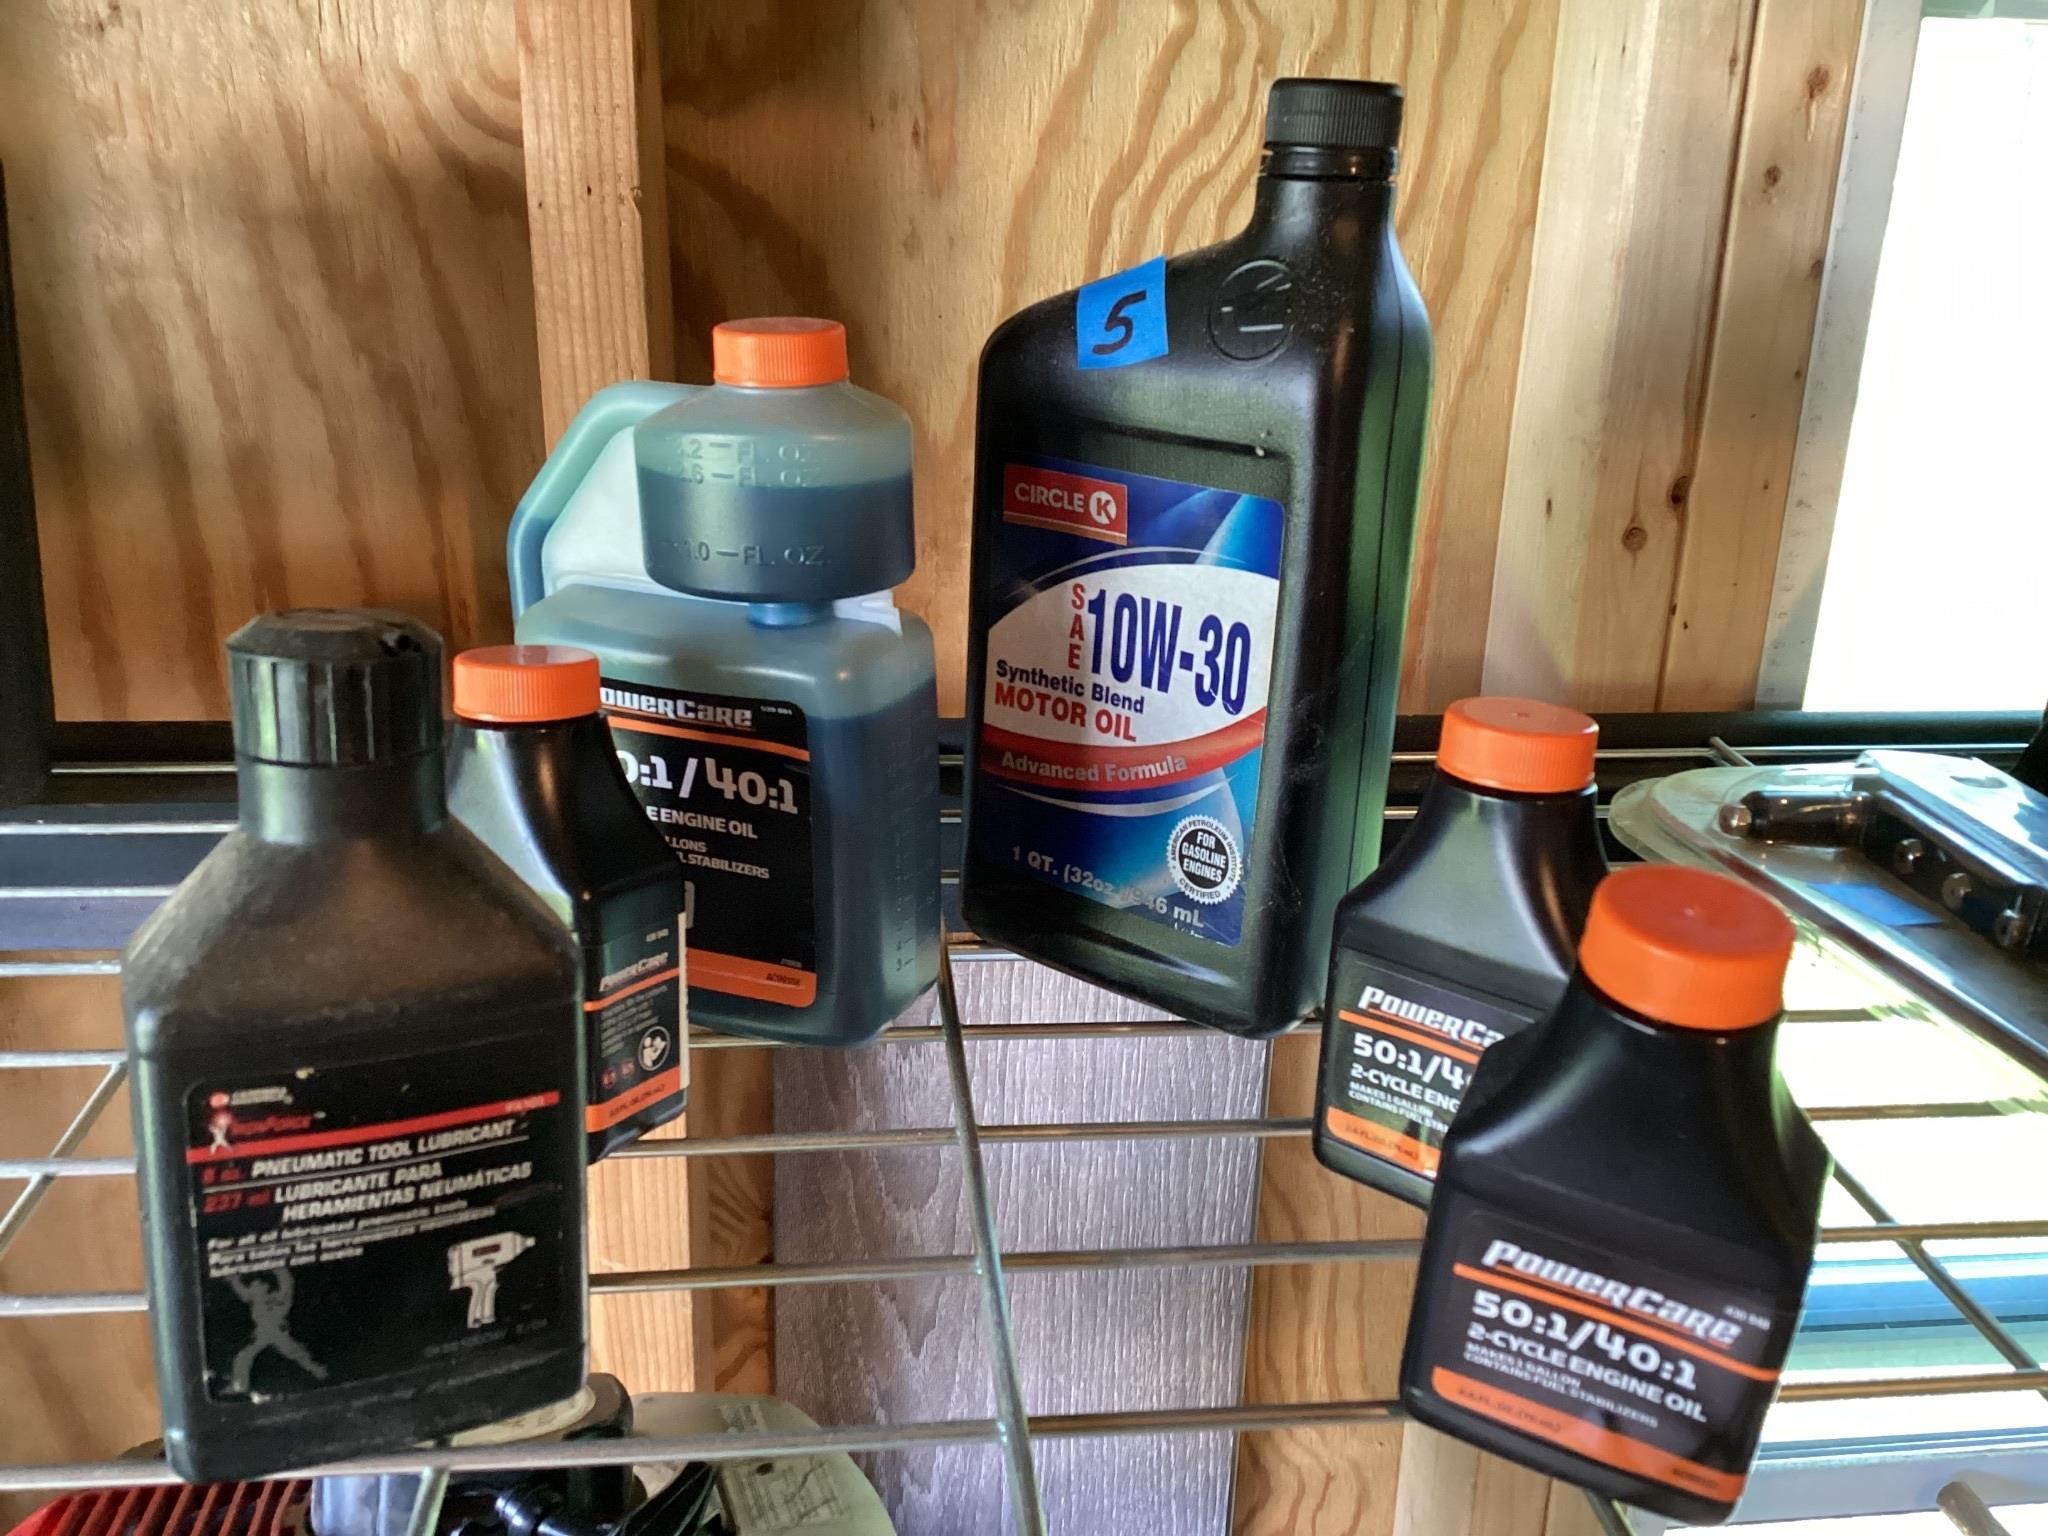 Oil and lubricants lot